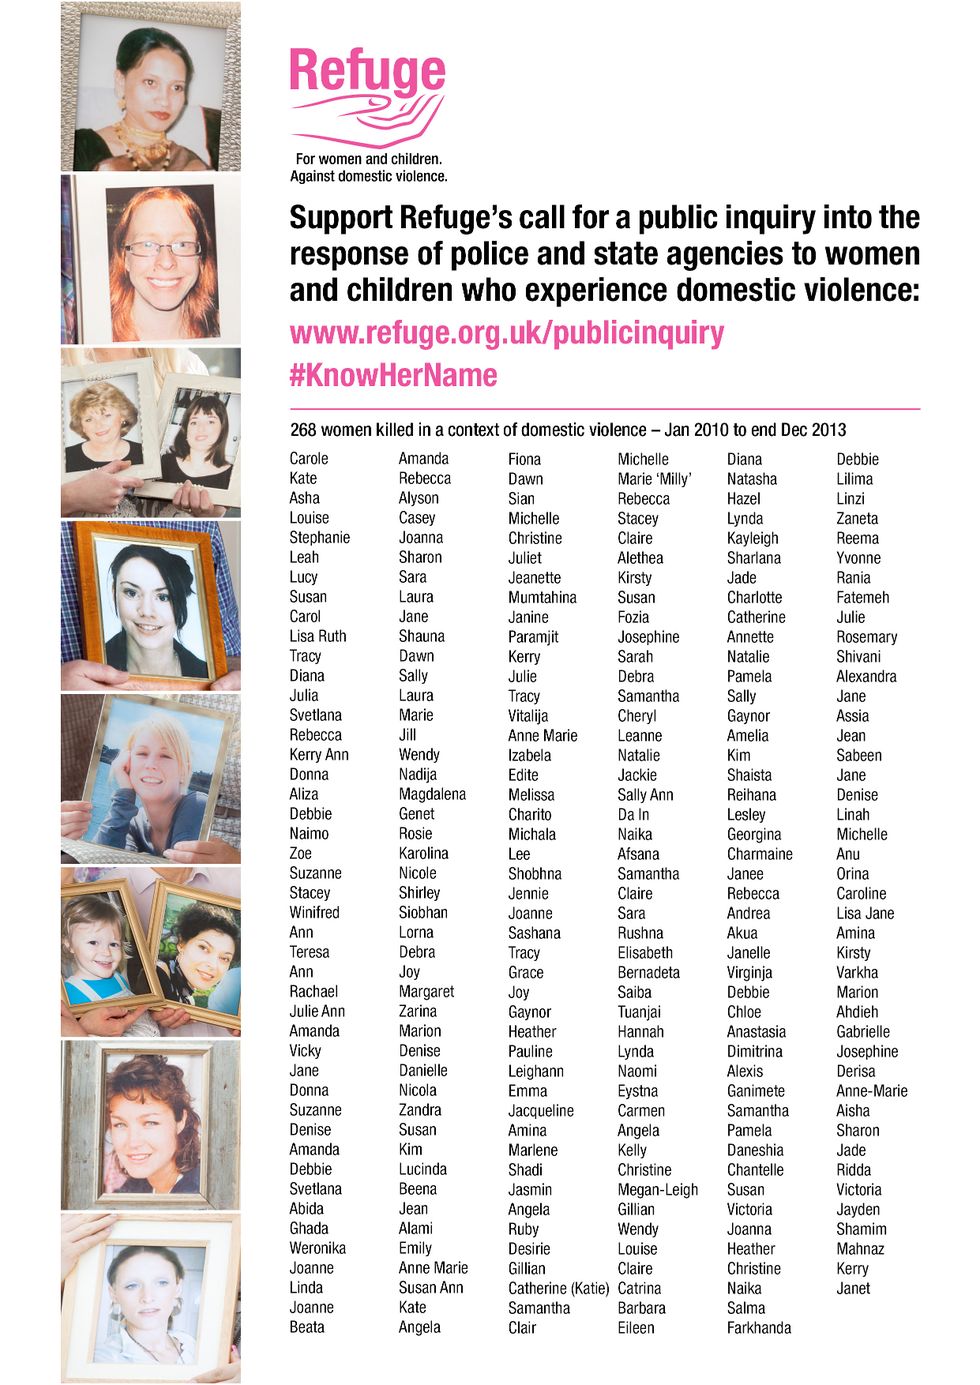 Refuge's #KnowHerName campaign calls for public inquiry into the state response to domestic violence